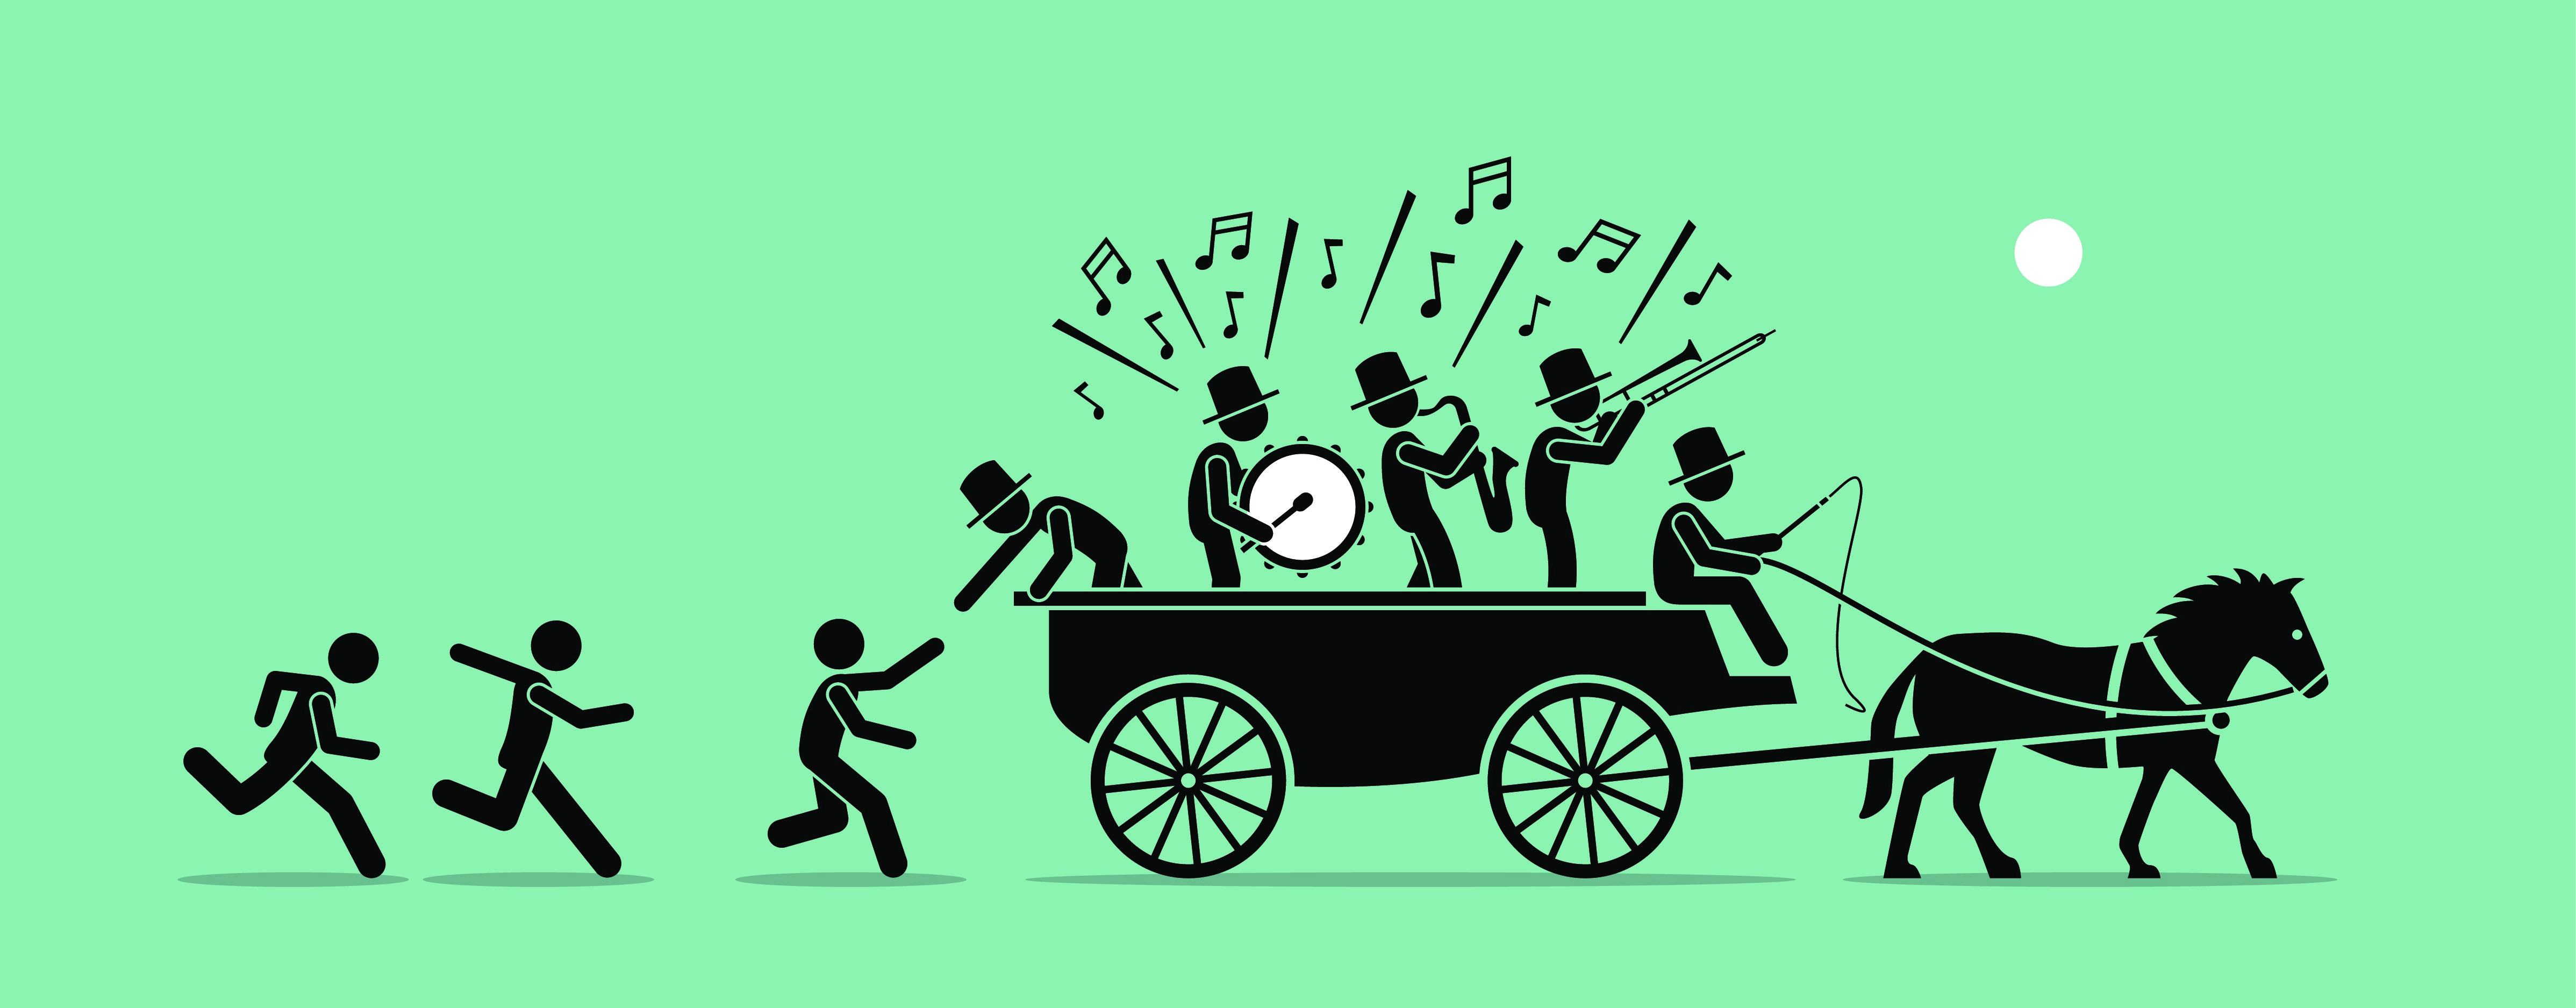 Illustration of musicians atop a horse-drawn wagon with people running behind.